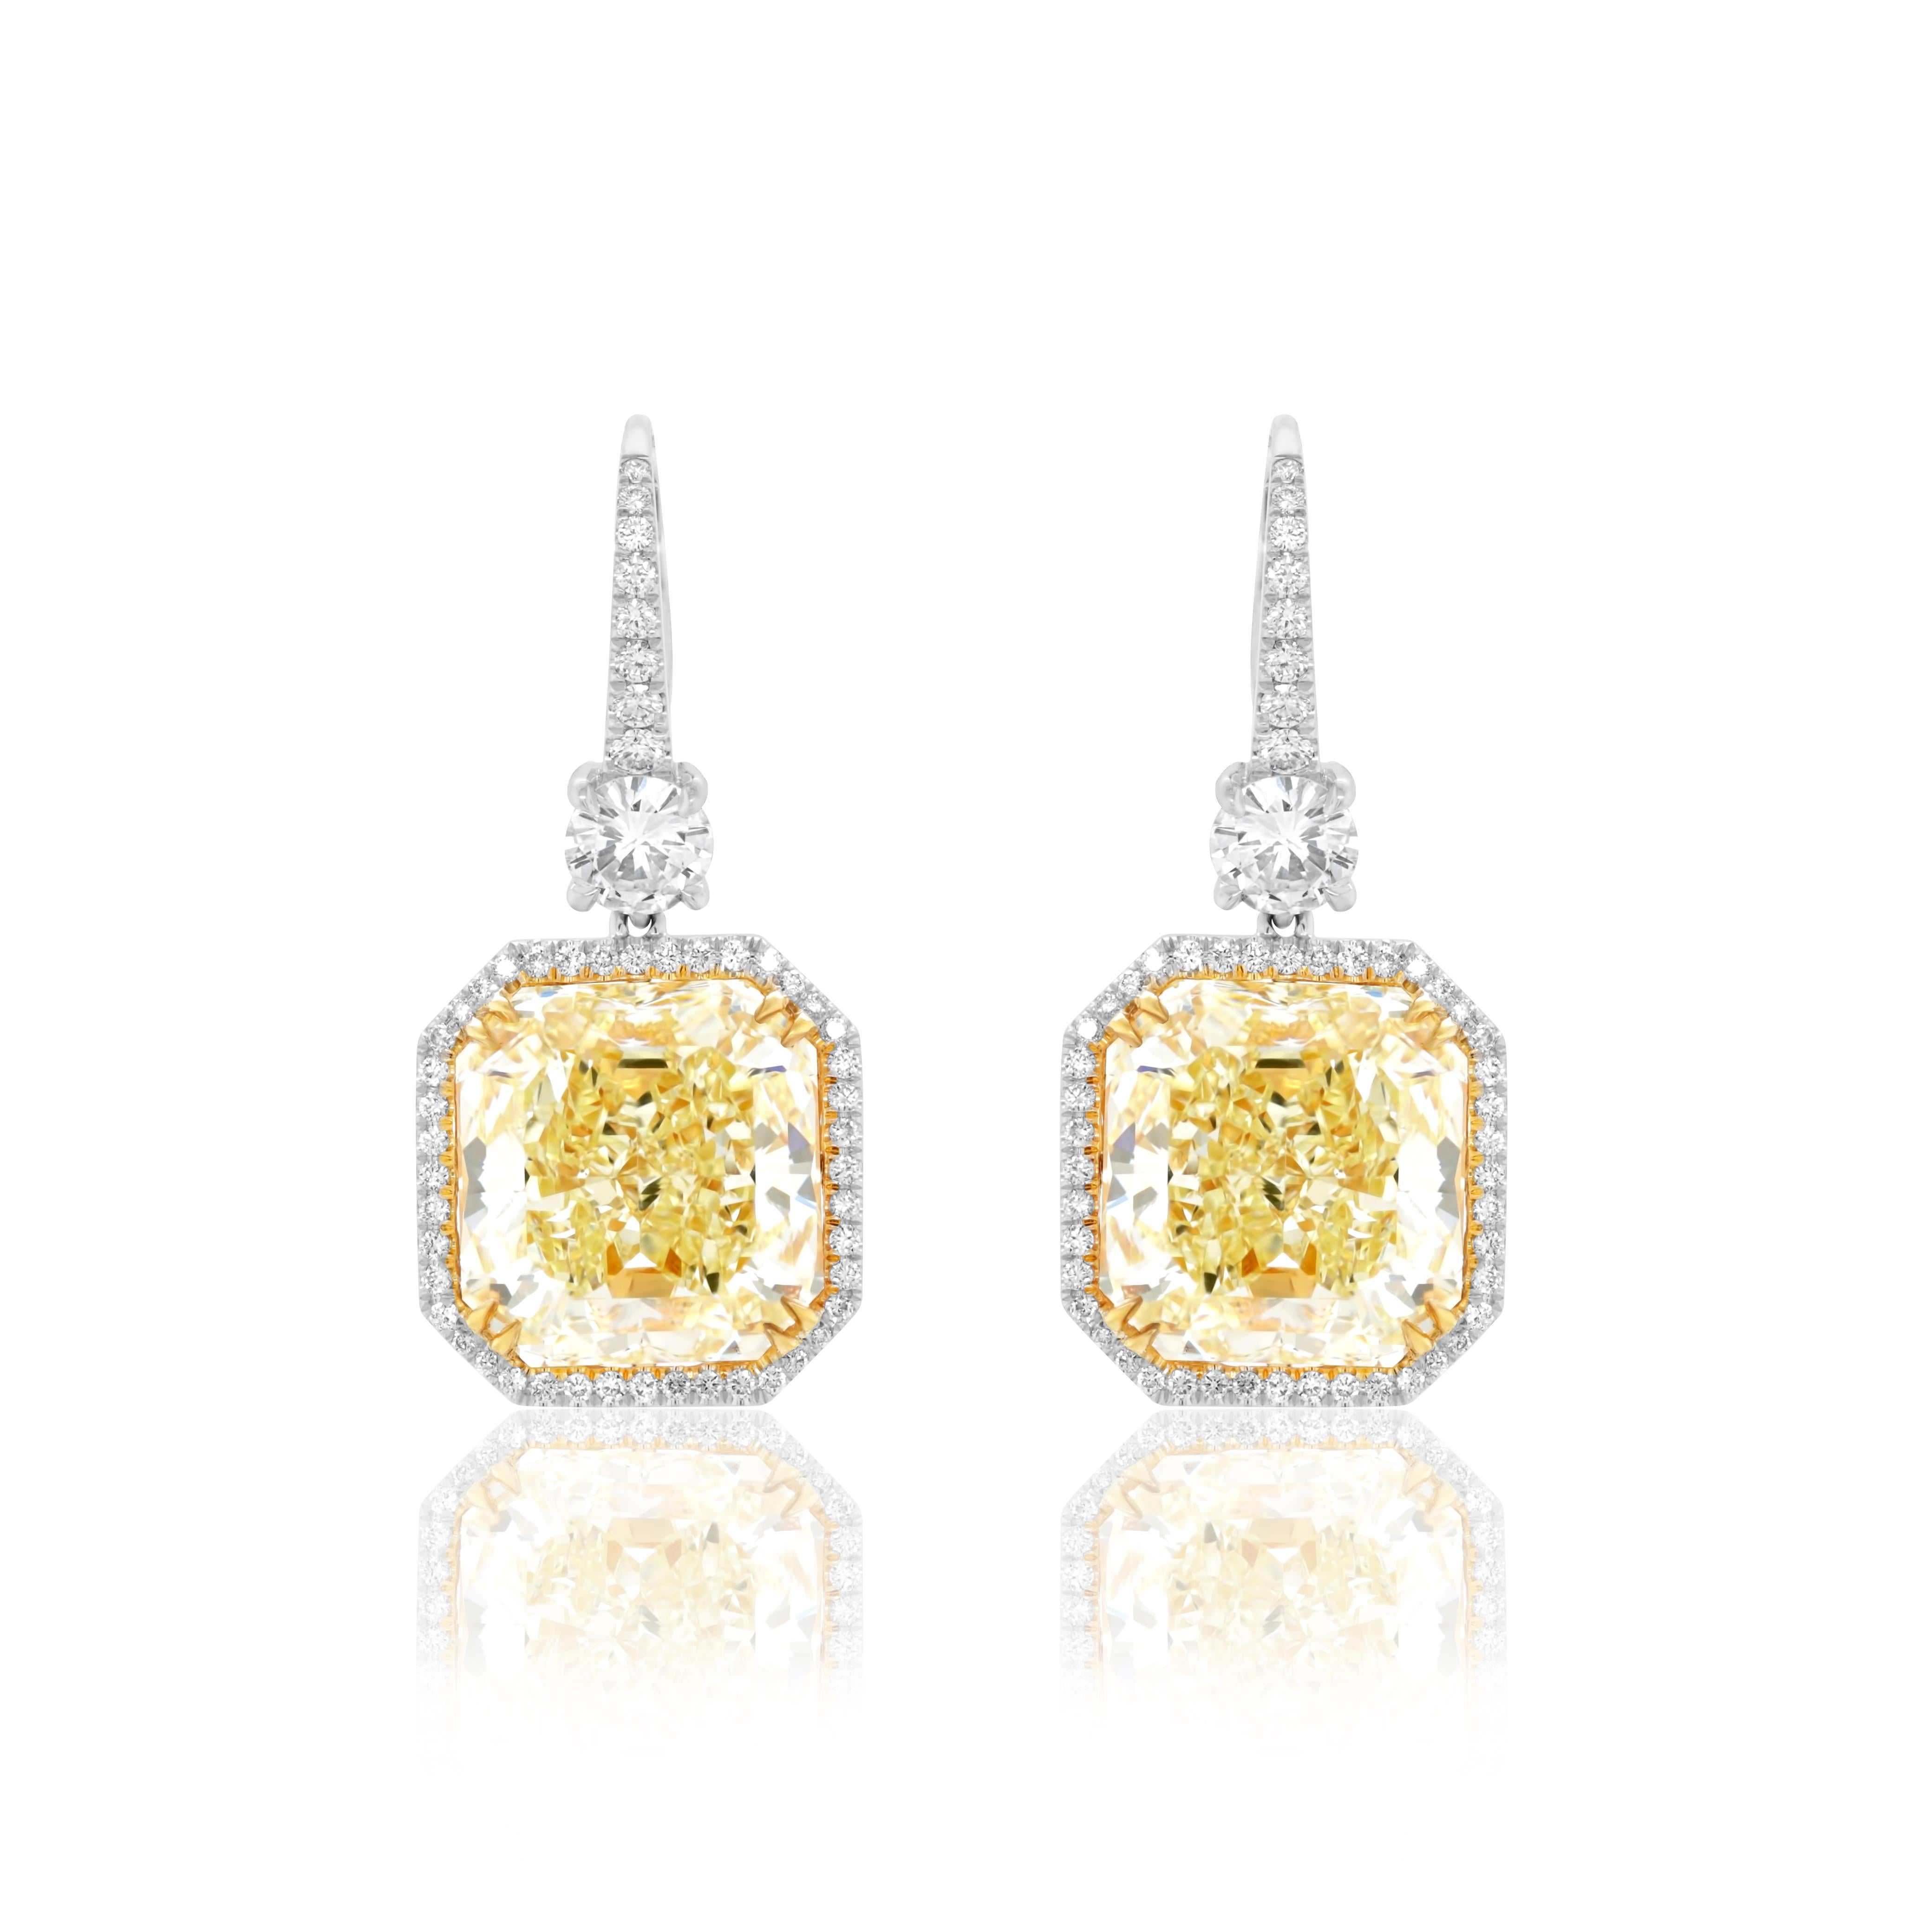 Diana M. 24.60 Carat Fancy Yellow GIA Diamond Earrings  In New Condition For Sale In New York, NY